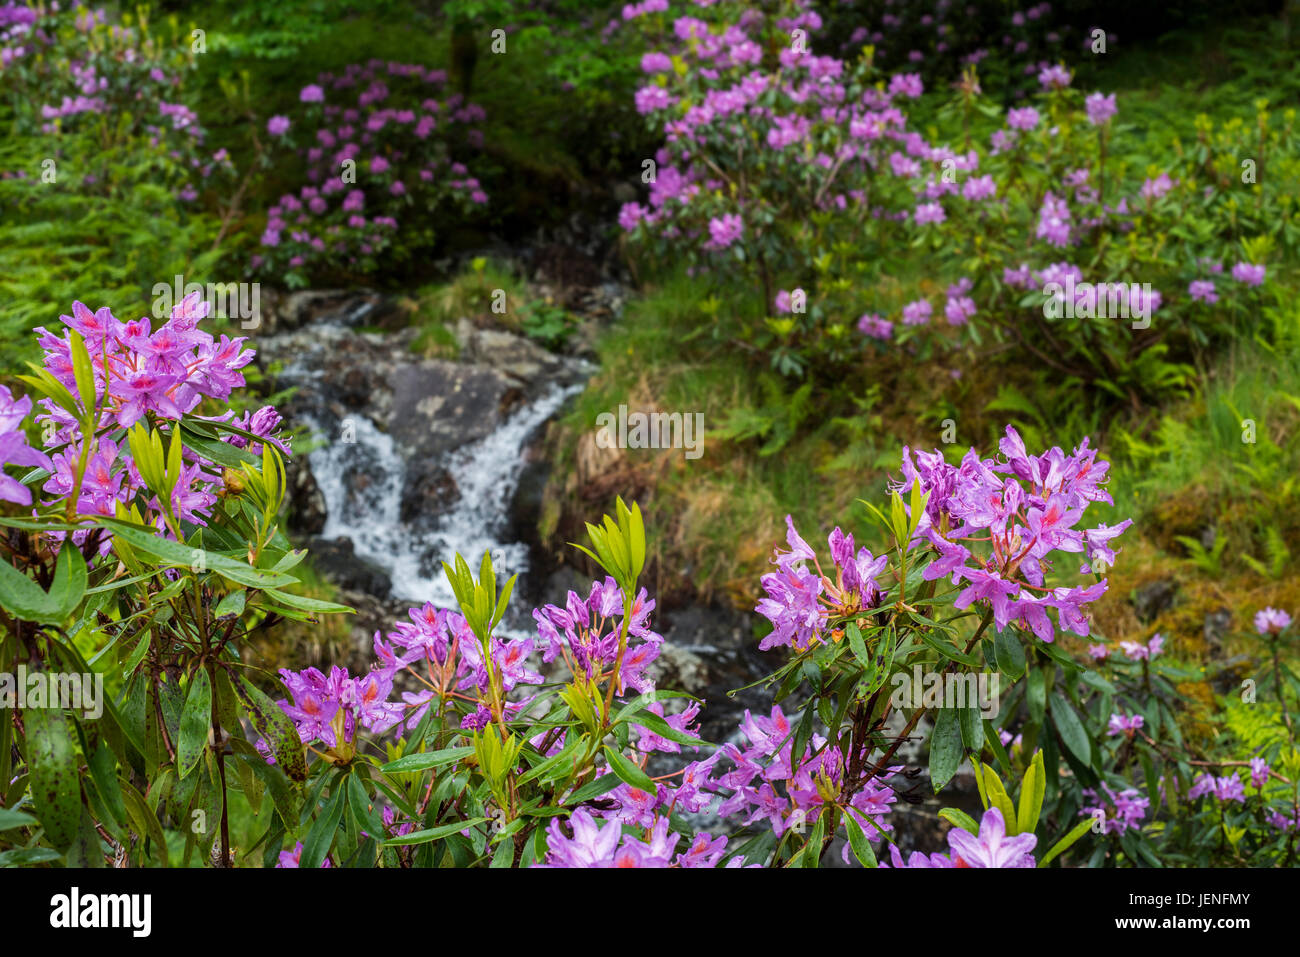 Common rhododendron / Pontic rhododendron (Rhododendron ponticum) in flower along stream, invasive species in the Scottish Highlands, Scotland Stock Photo